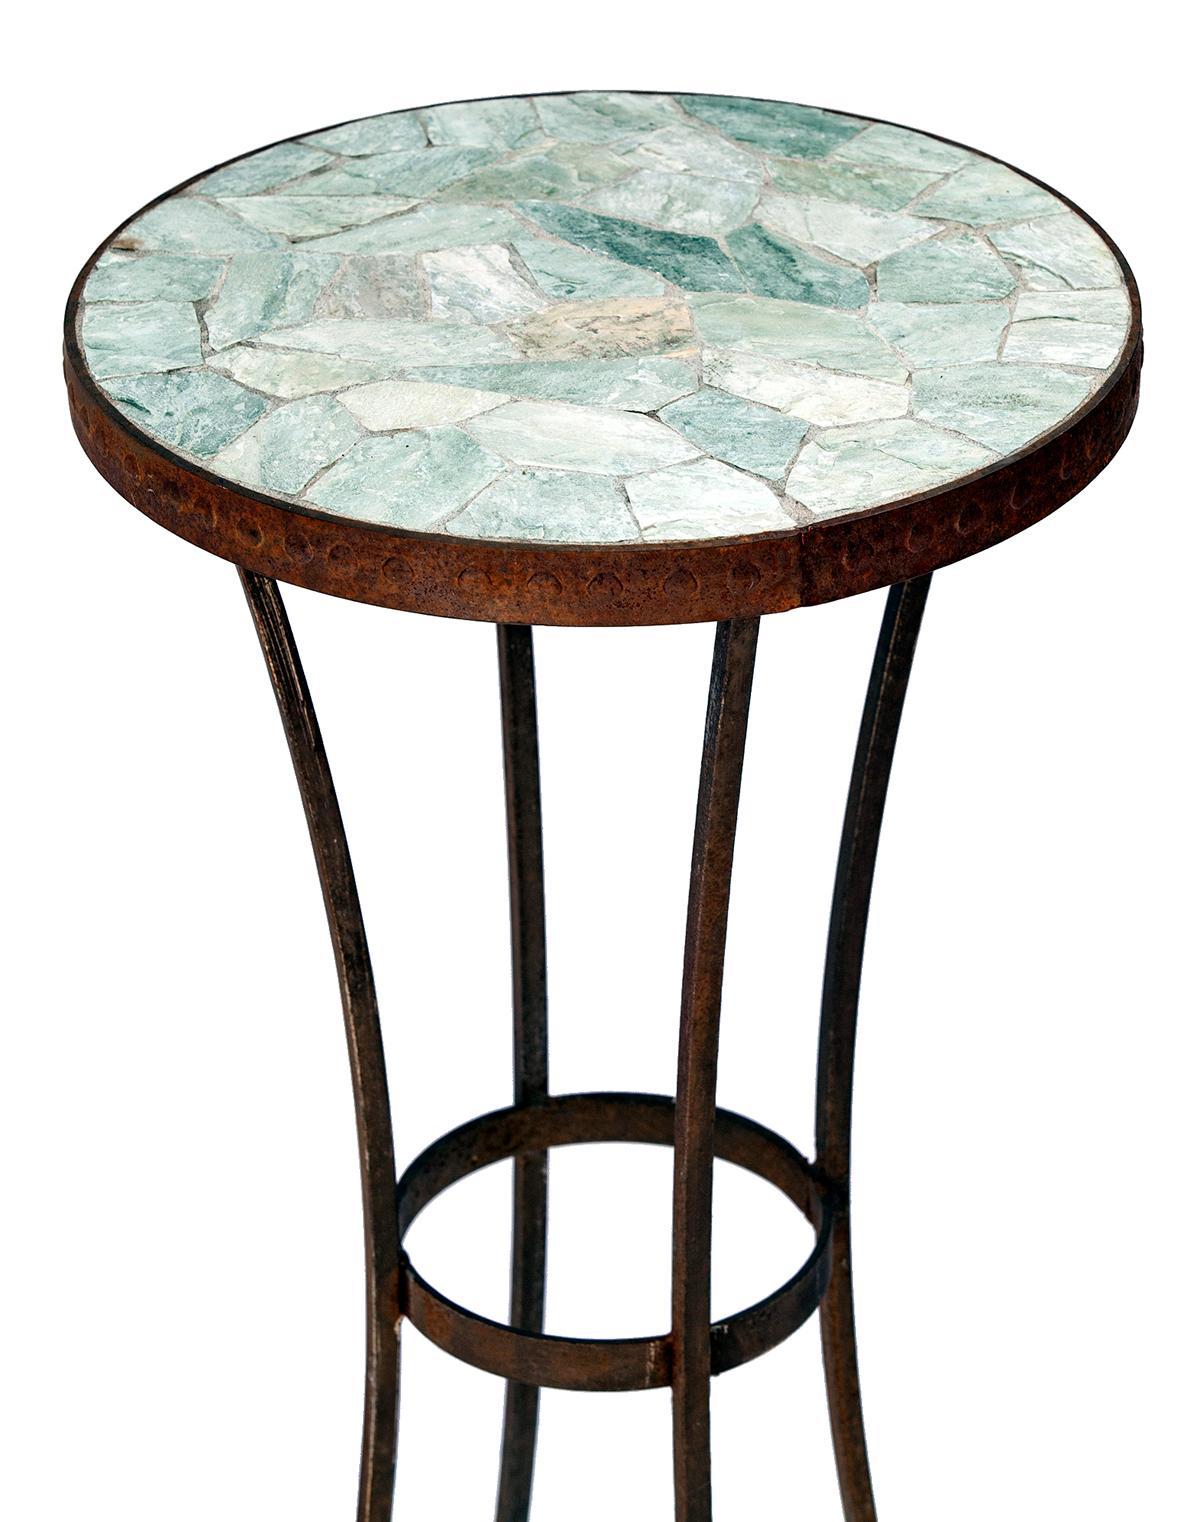 This simple iron plant stand features a mosaic slate top securely set within an iron frame, ensuring the piece is robust and durable.